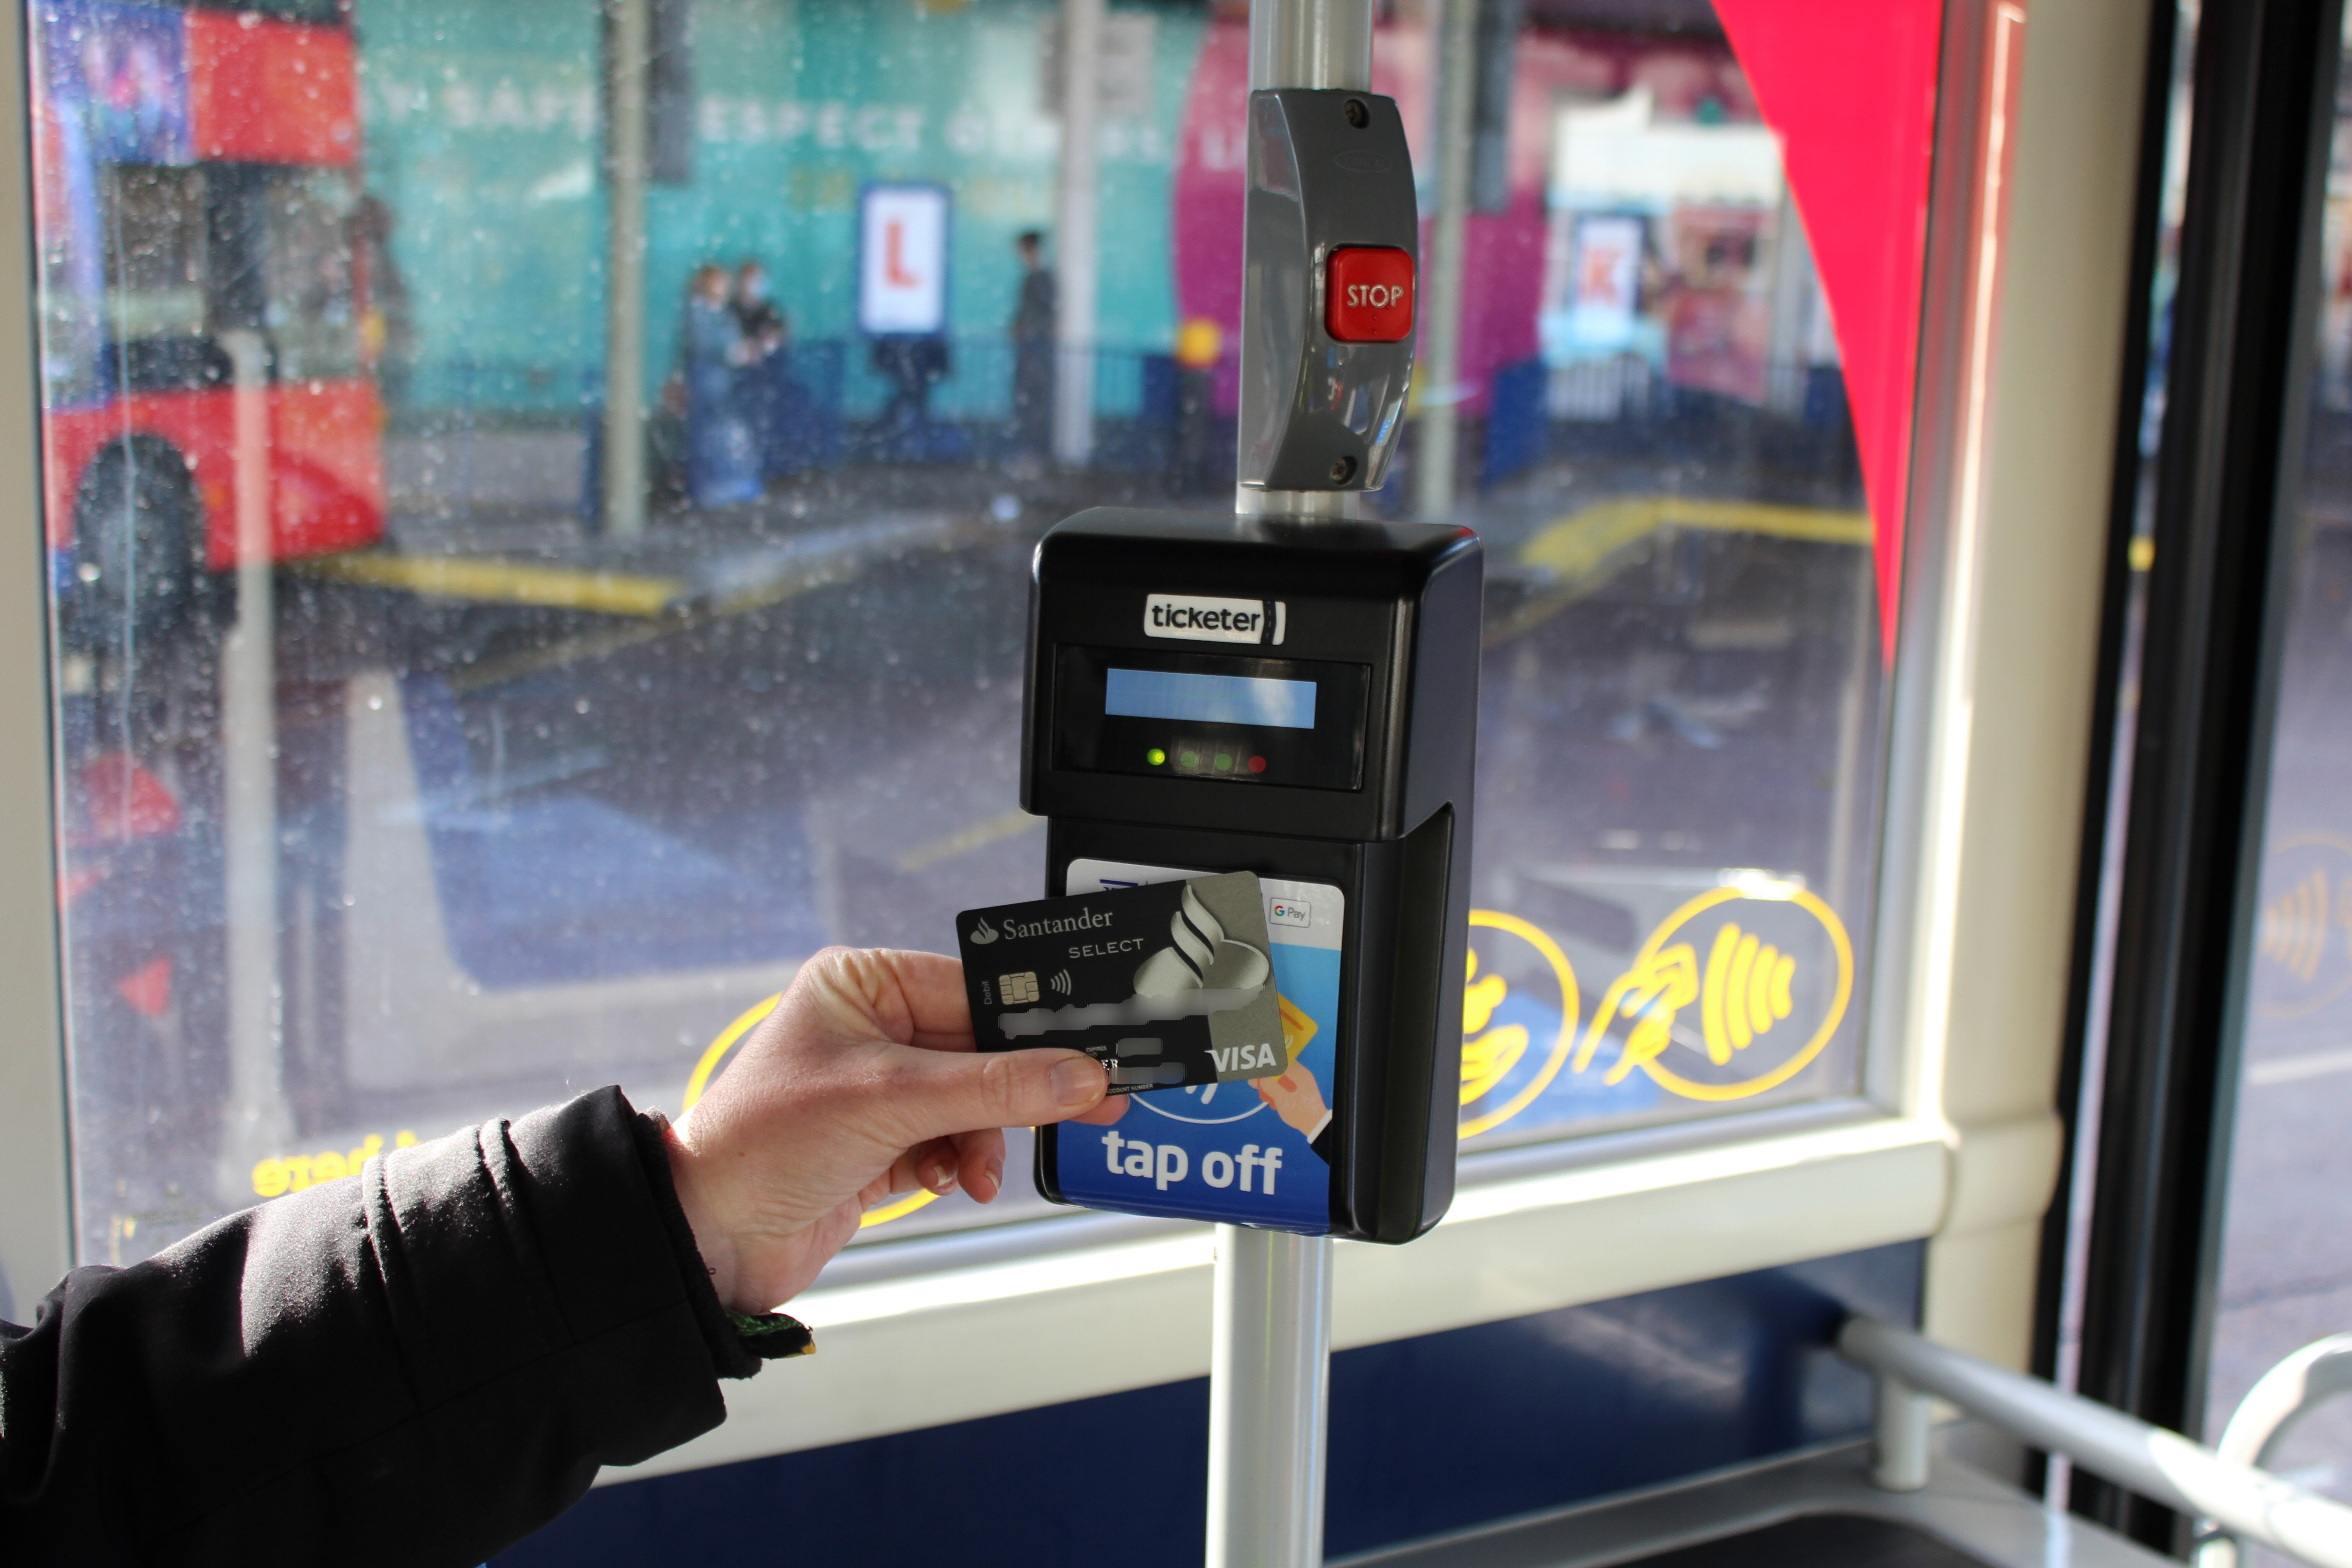 tap on tap off contactless payment - tap off reader on bus